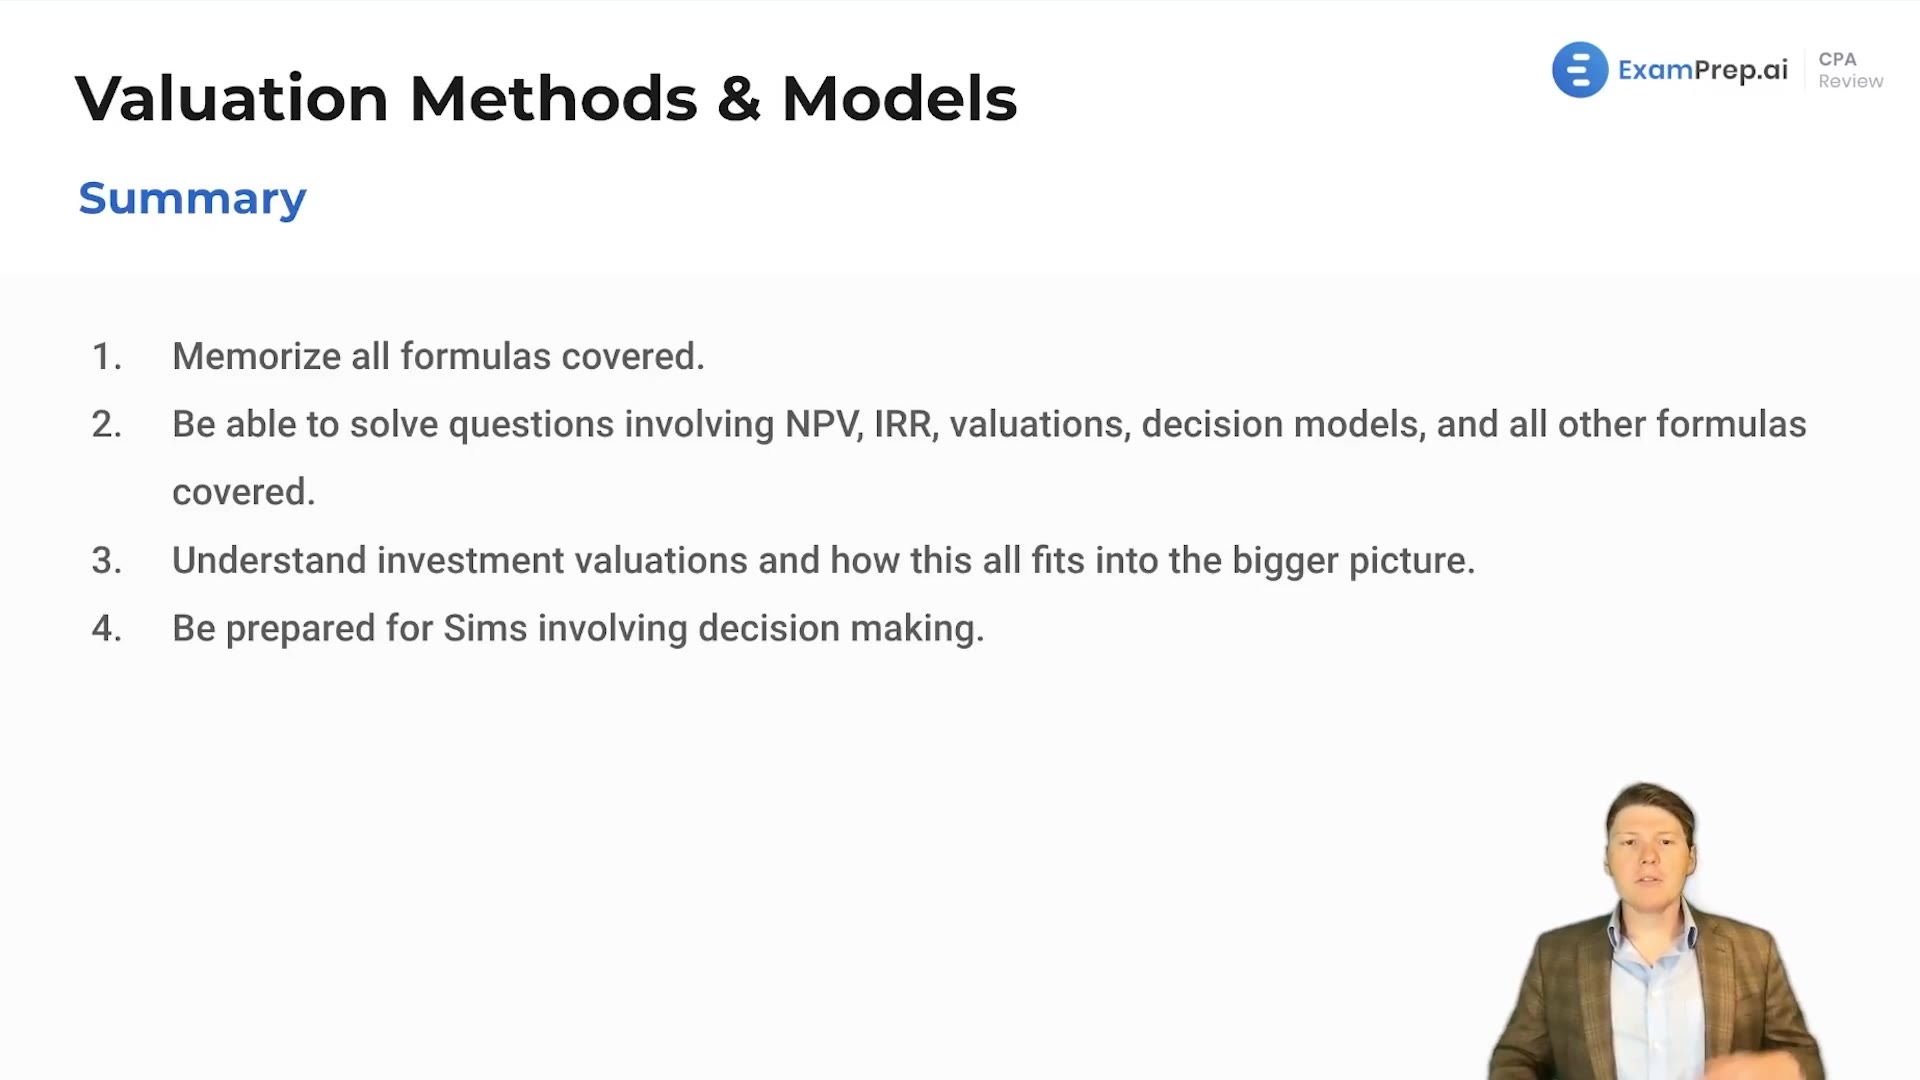 Valuation Methods and Models Summary lesson thumbnail